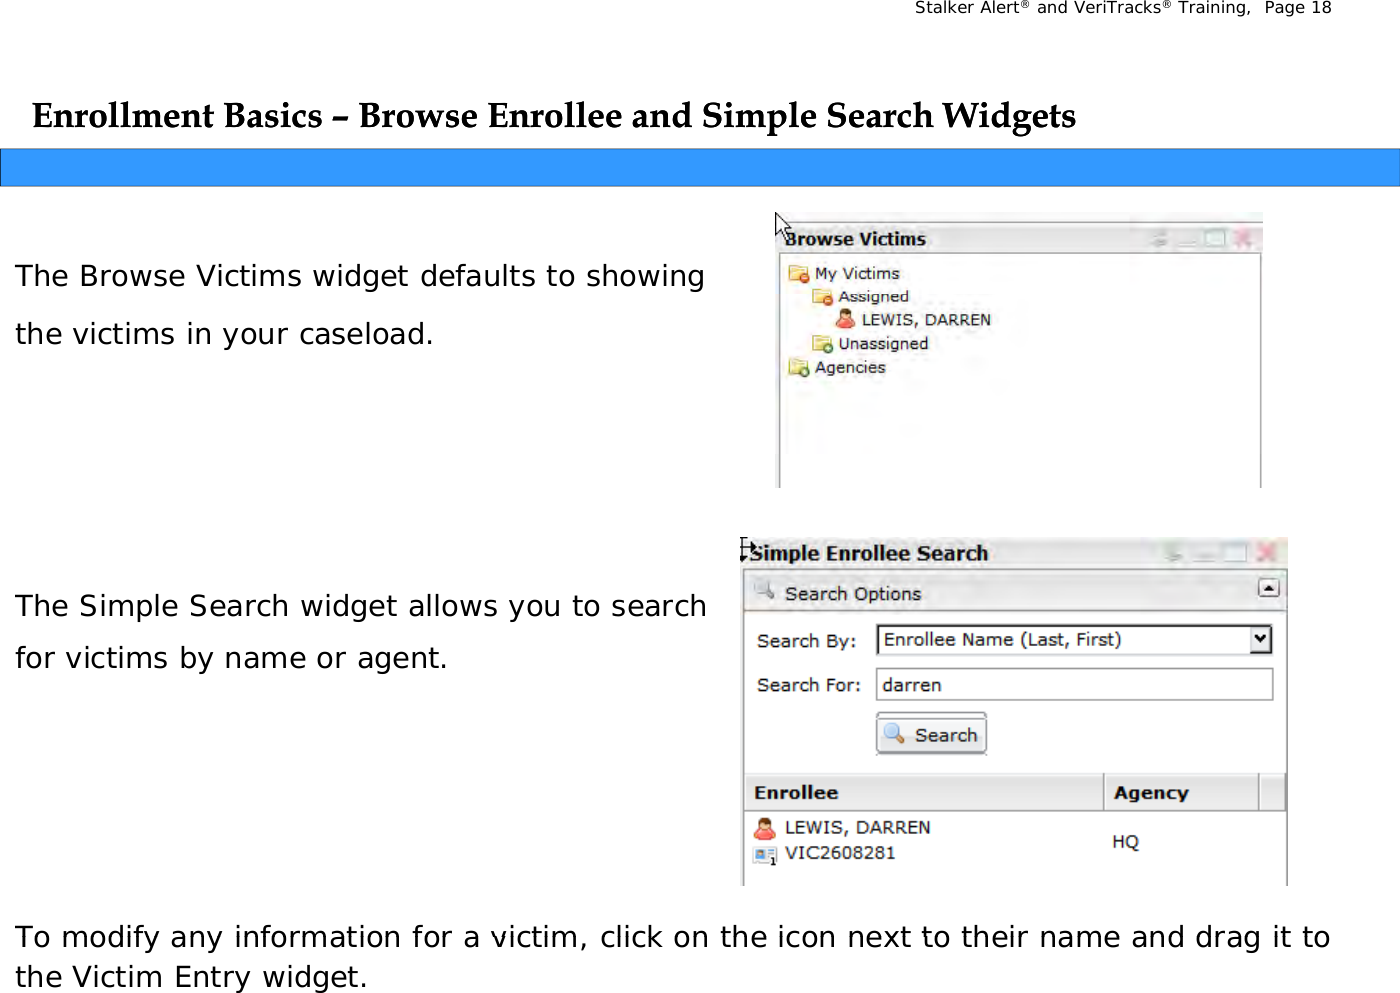 Stalker Alert®and VeriTracks®Training,  Page 18Enrollment Basics Enrollment Basics –– Browse Enrollee and Simple Search WidgetsBrowse Enrollee and Simple Search WidgetspgpgThe Browse Victims widget defaults to showing the victims in your caseload.The Simple Search widget allows you to search The Simple Search widget allows you to search for victims by name or agent. To modify any information for a victim  click on the icon next to their name and drag it to To modify any information for a victim, click on the icon next to their name and drag it to the Victim Entry widget.